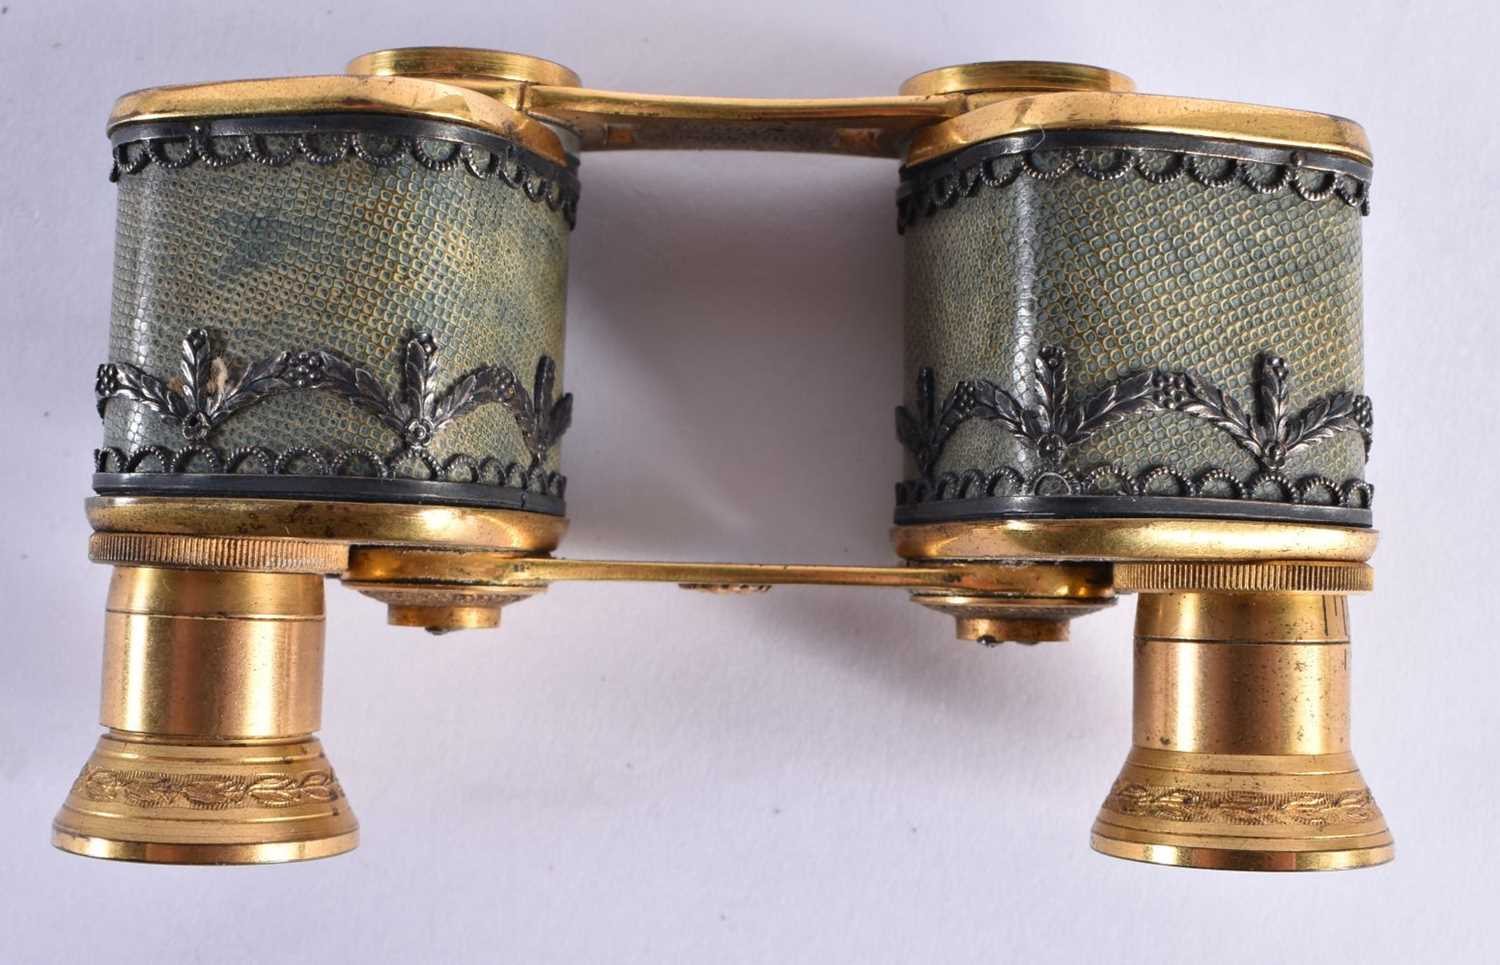 A LOVELY PAIR OF EARLY 19TH CENTURY FRENCH BRONZE SHAGREEN AND SILVER OPTICAL GLASSES signed Boin - Image 4 of 7